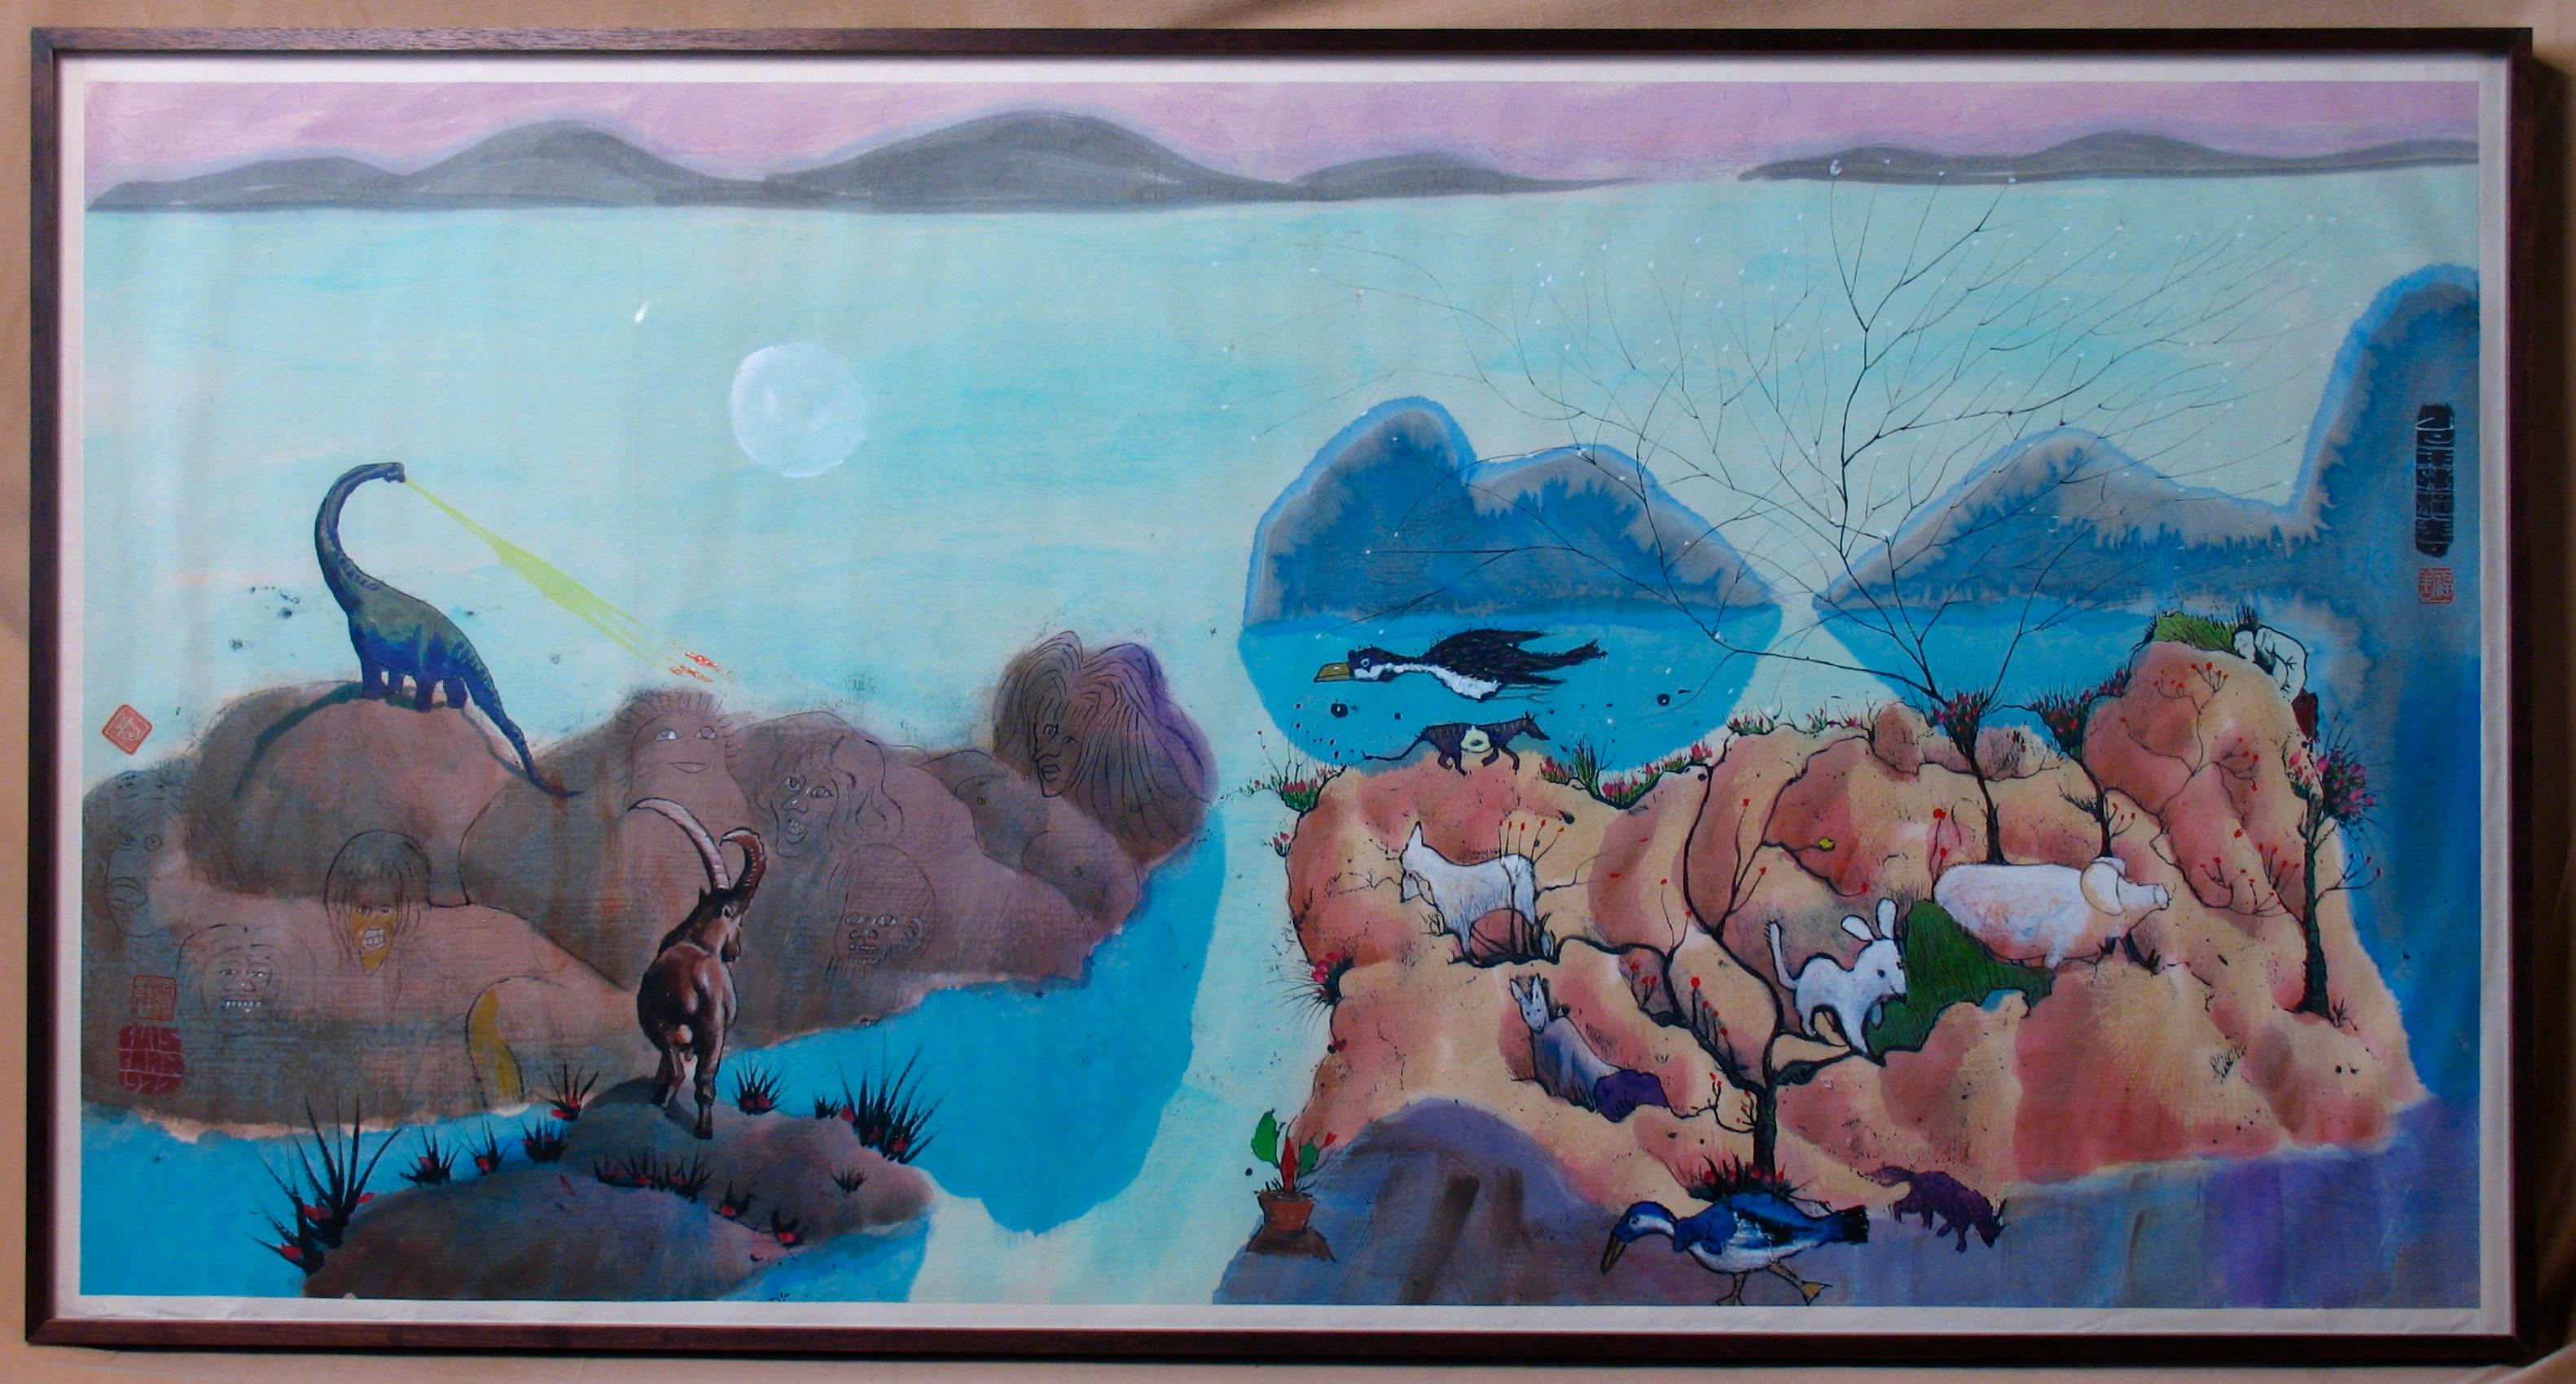 Chinese ink and water colours painted on paper by the artist, Luis Chan (Chen Fushan) 1905-1995, a fantasy landscape depicting islands in a dream blue sea, one barren island formed of human form ghosts inhabited by one isolated fire breathing